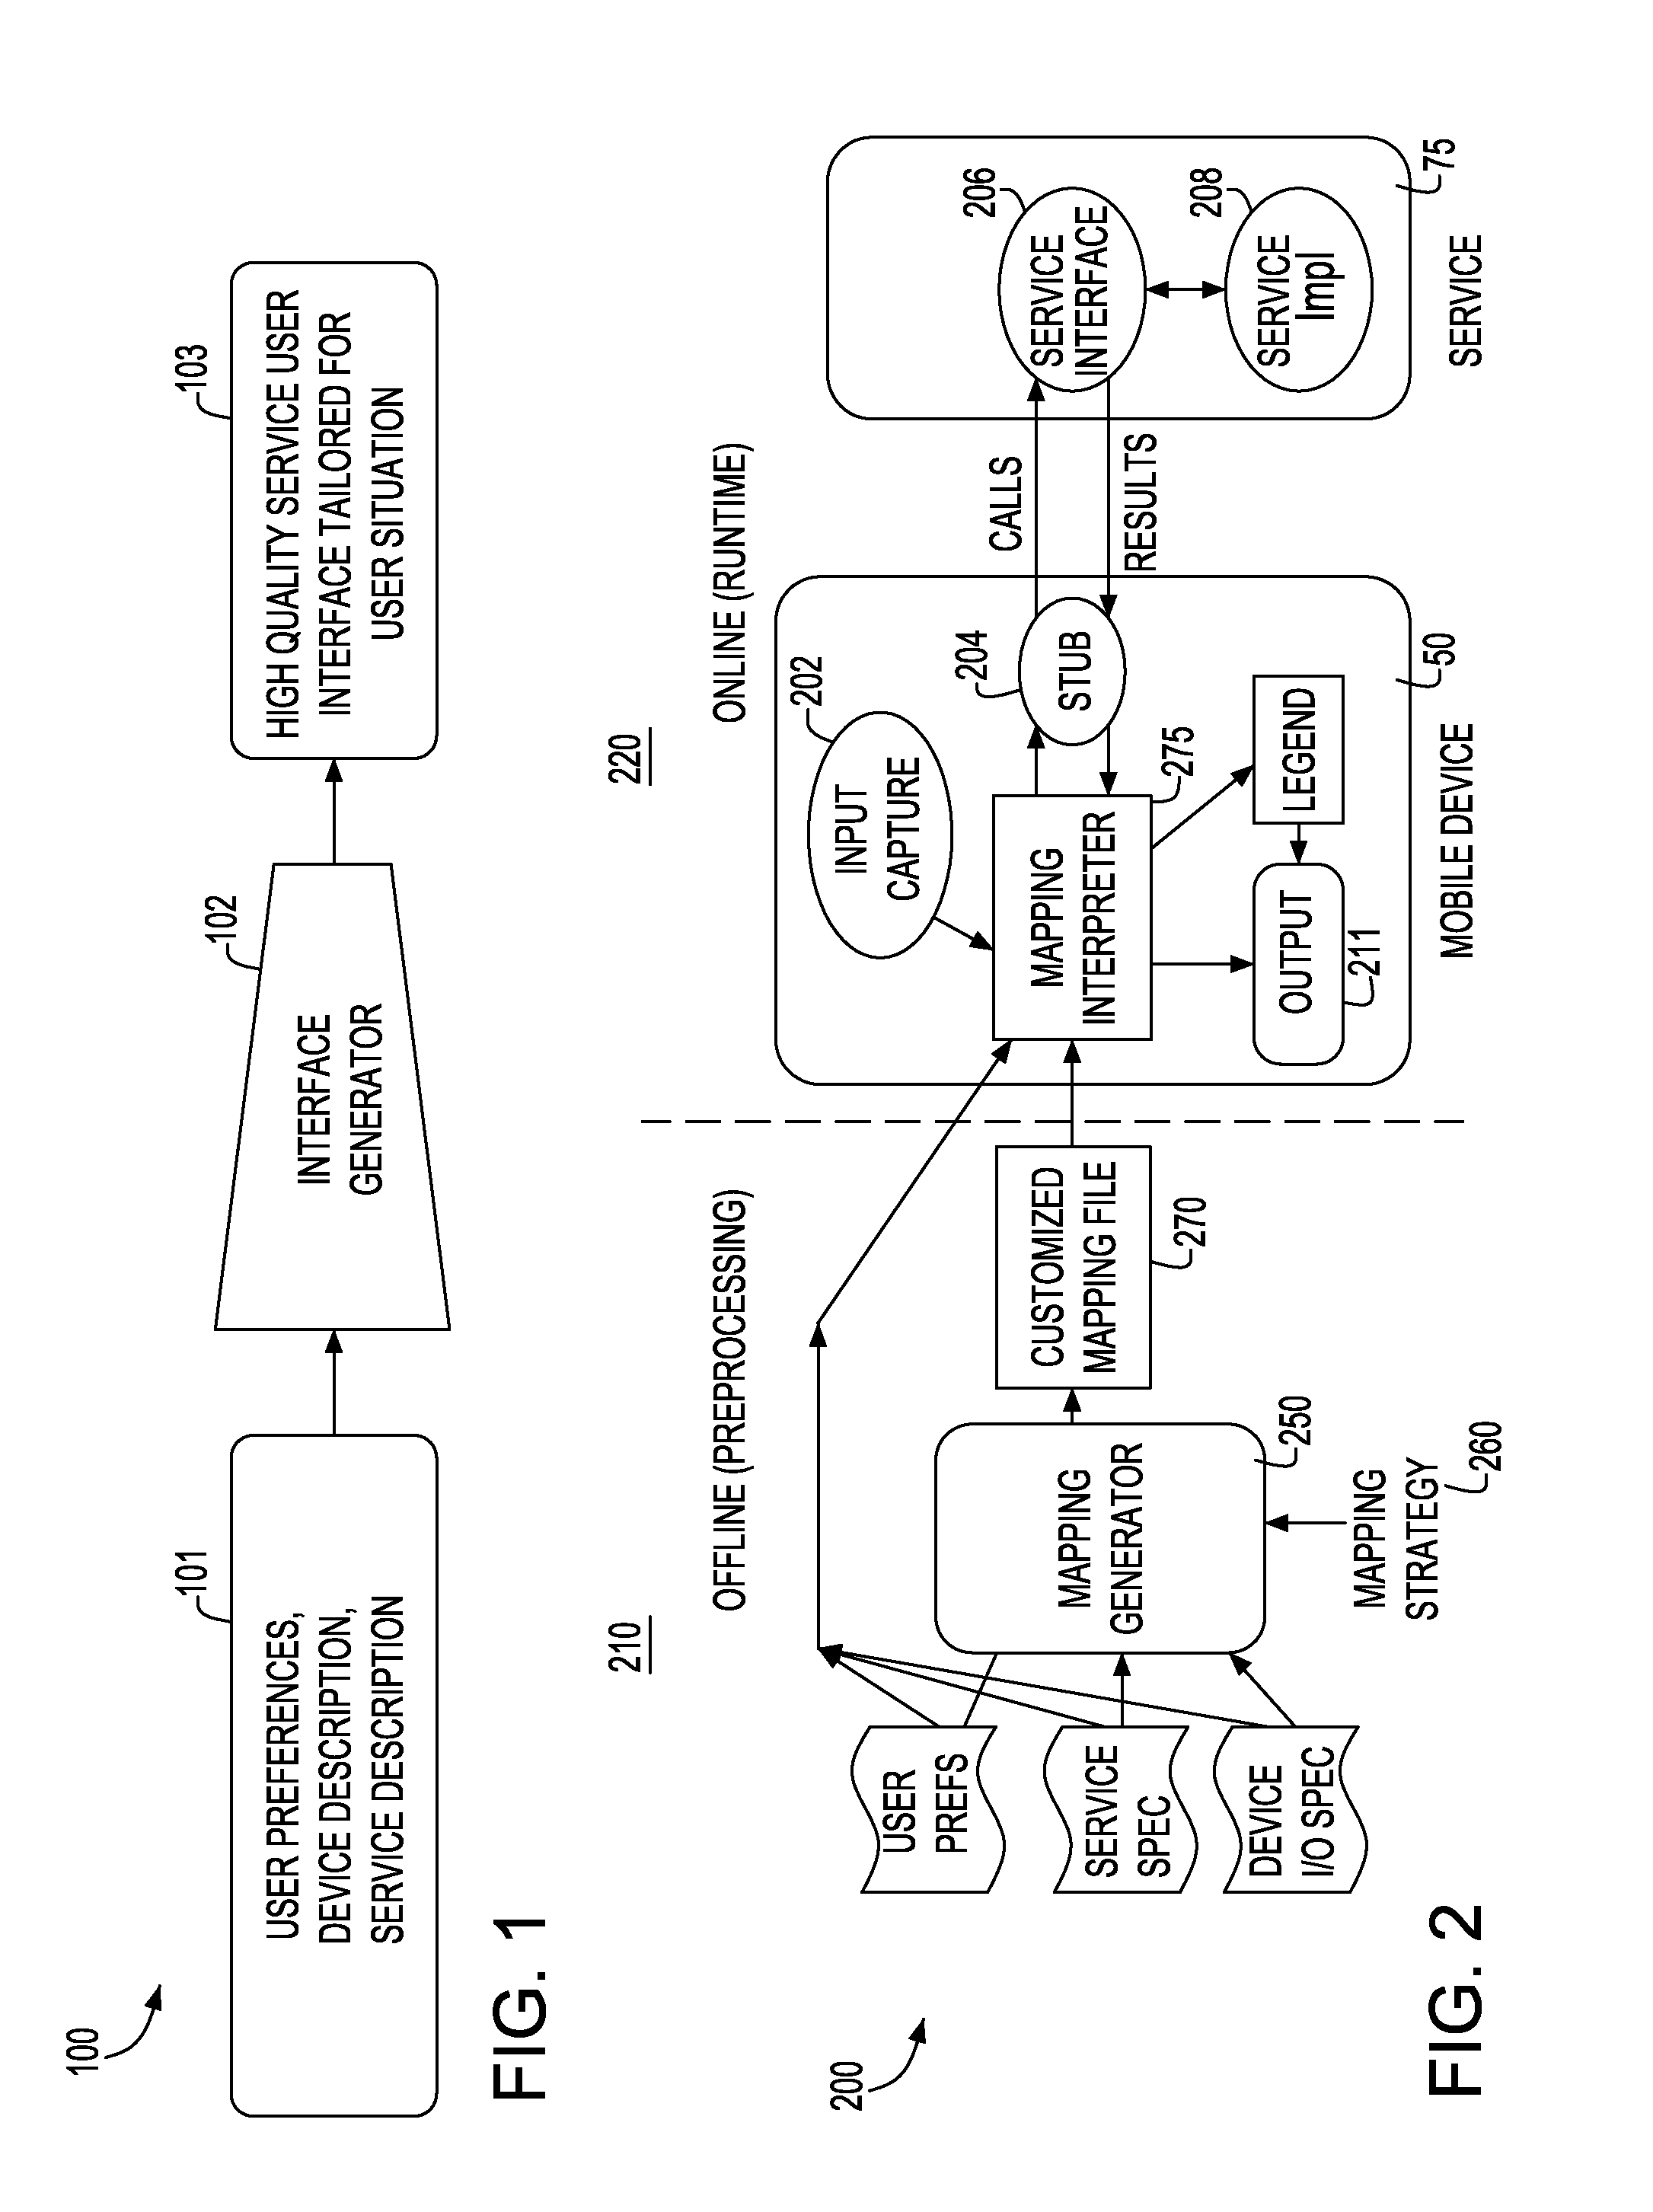 System and method for dynamic mapping of abstract user interface to a mobile device at run time